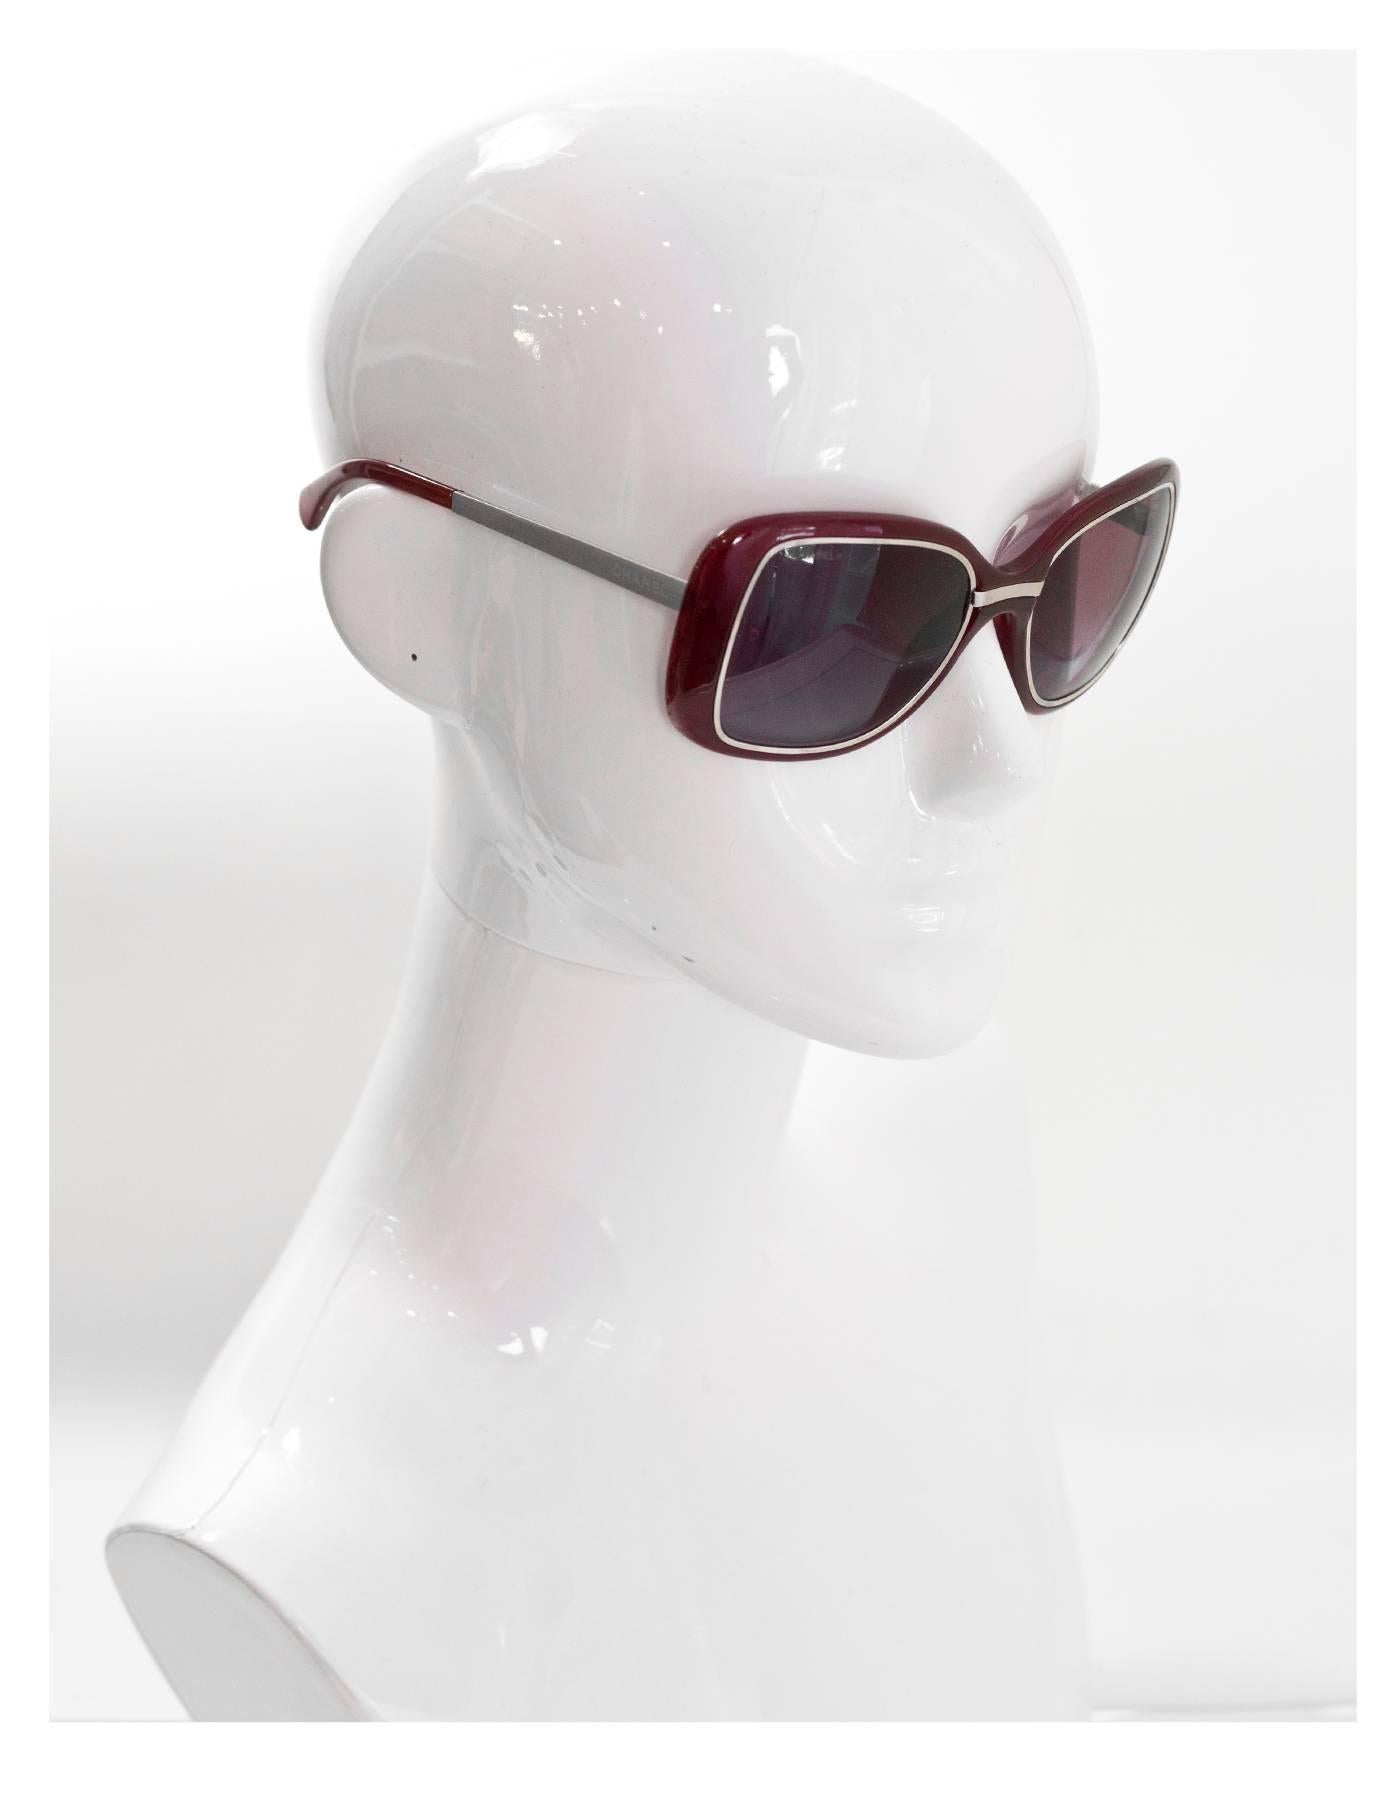 Chanel Burgundy & Silver Sunglasses

Made In: Italy
Color: Burgundy, silver
Materials: Metal and resin
Overall Condition: Excellent pre-owned condition, light surface marks throughout

Measurements: 
Across: 5.5"
Lens: 2.25"
Arm: